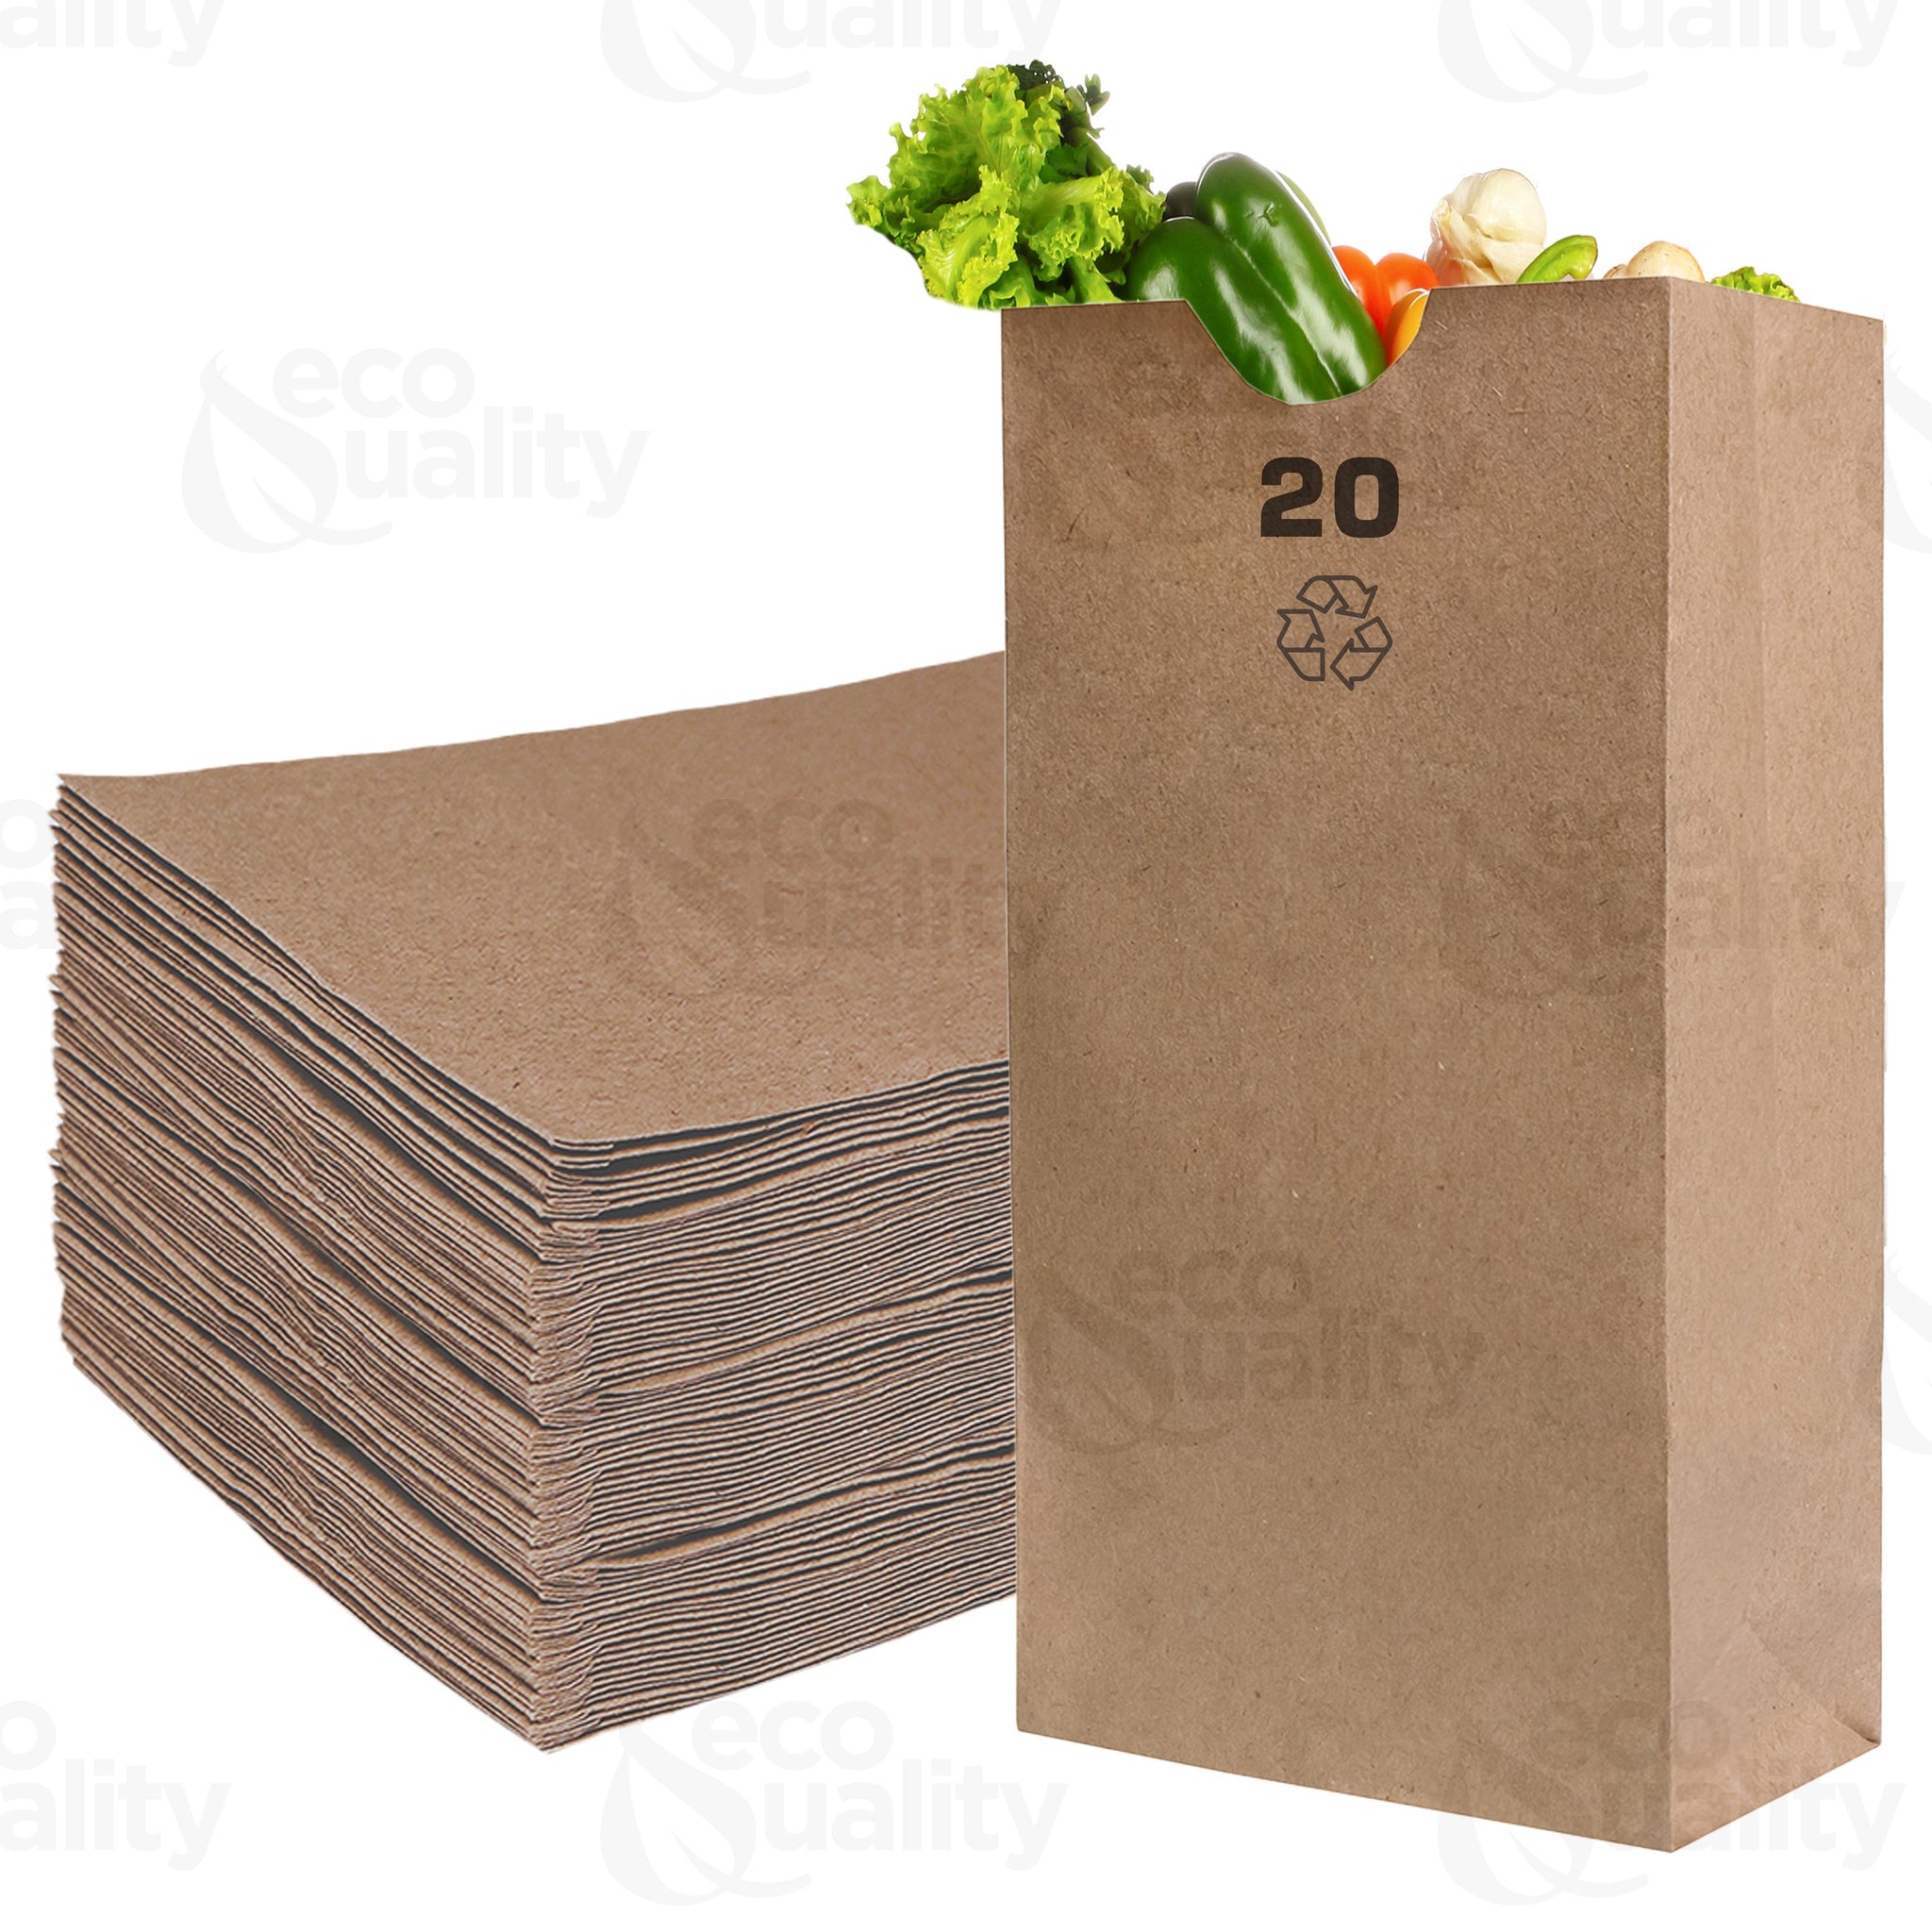 disposable bag brown Paper Bags brown Paper Shopping Bags foldable paper bag catering bags kraft paper bag 20 pound candy bag snack bag gift bags DIY Bags arts and craft Sandwich Bag brown paper bag party favor bag lunch bag togo bag takeout bag Restaurant supplies paper bakery bags Kraft Paper Bags kraft grocery bags supermarket Household Supplies hero bread tall long paper bag 20 pound